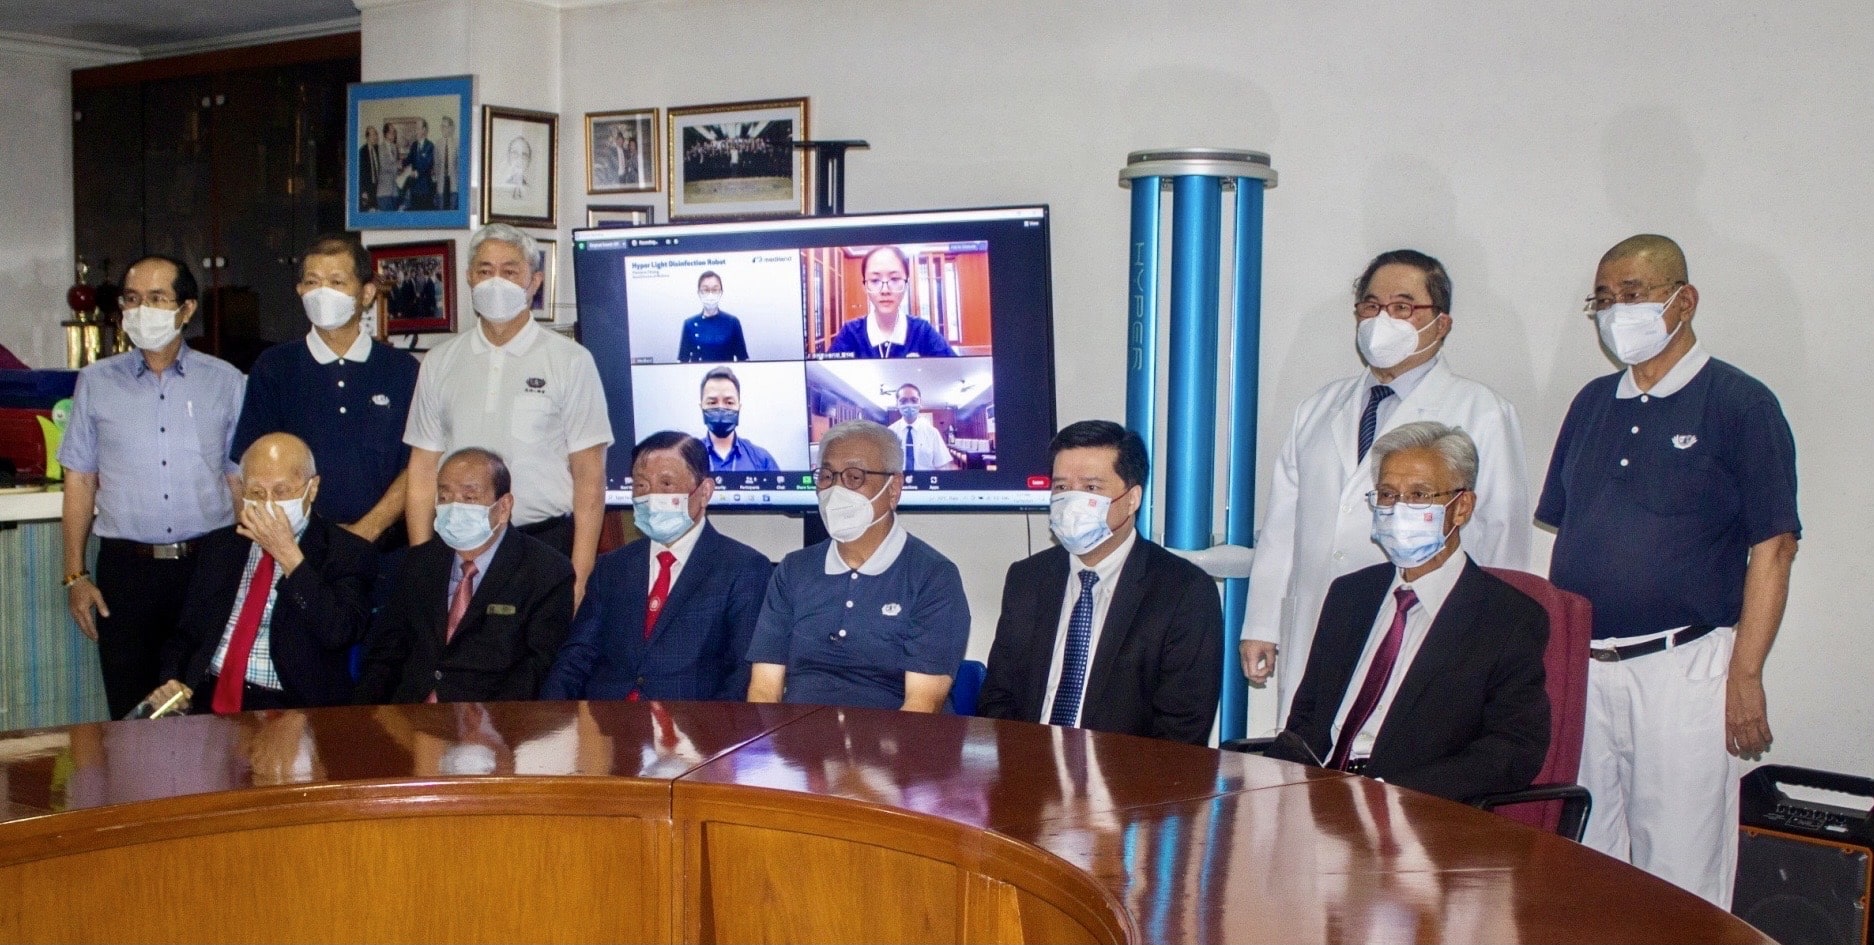 Also in attendance at the turnover ceremony were (standing, third from left) Tzu Chi International Medical Association (TIMA) co-founder and Chinese General Hospital and Medical Center (CGHMC) surgeon Dr. Josefino Qua; (seated, third from left) Philippine Overseas Chinese Charity Association Chairman Lu Zuyin; Tzu Chi volunteers (standing, first from right) Alfredo Li and (standing second from right) Dr. Antonio Say; and (seated, second from right) CGHMC Executive Vice President and Chief Operating Officer Kelly Sia. 【Photo by Matt Serrano】